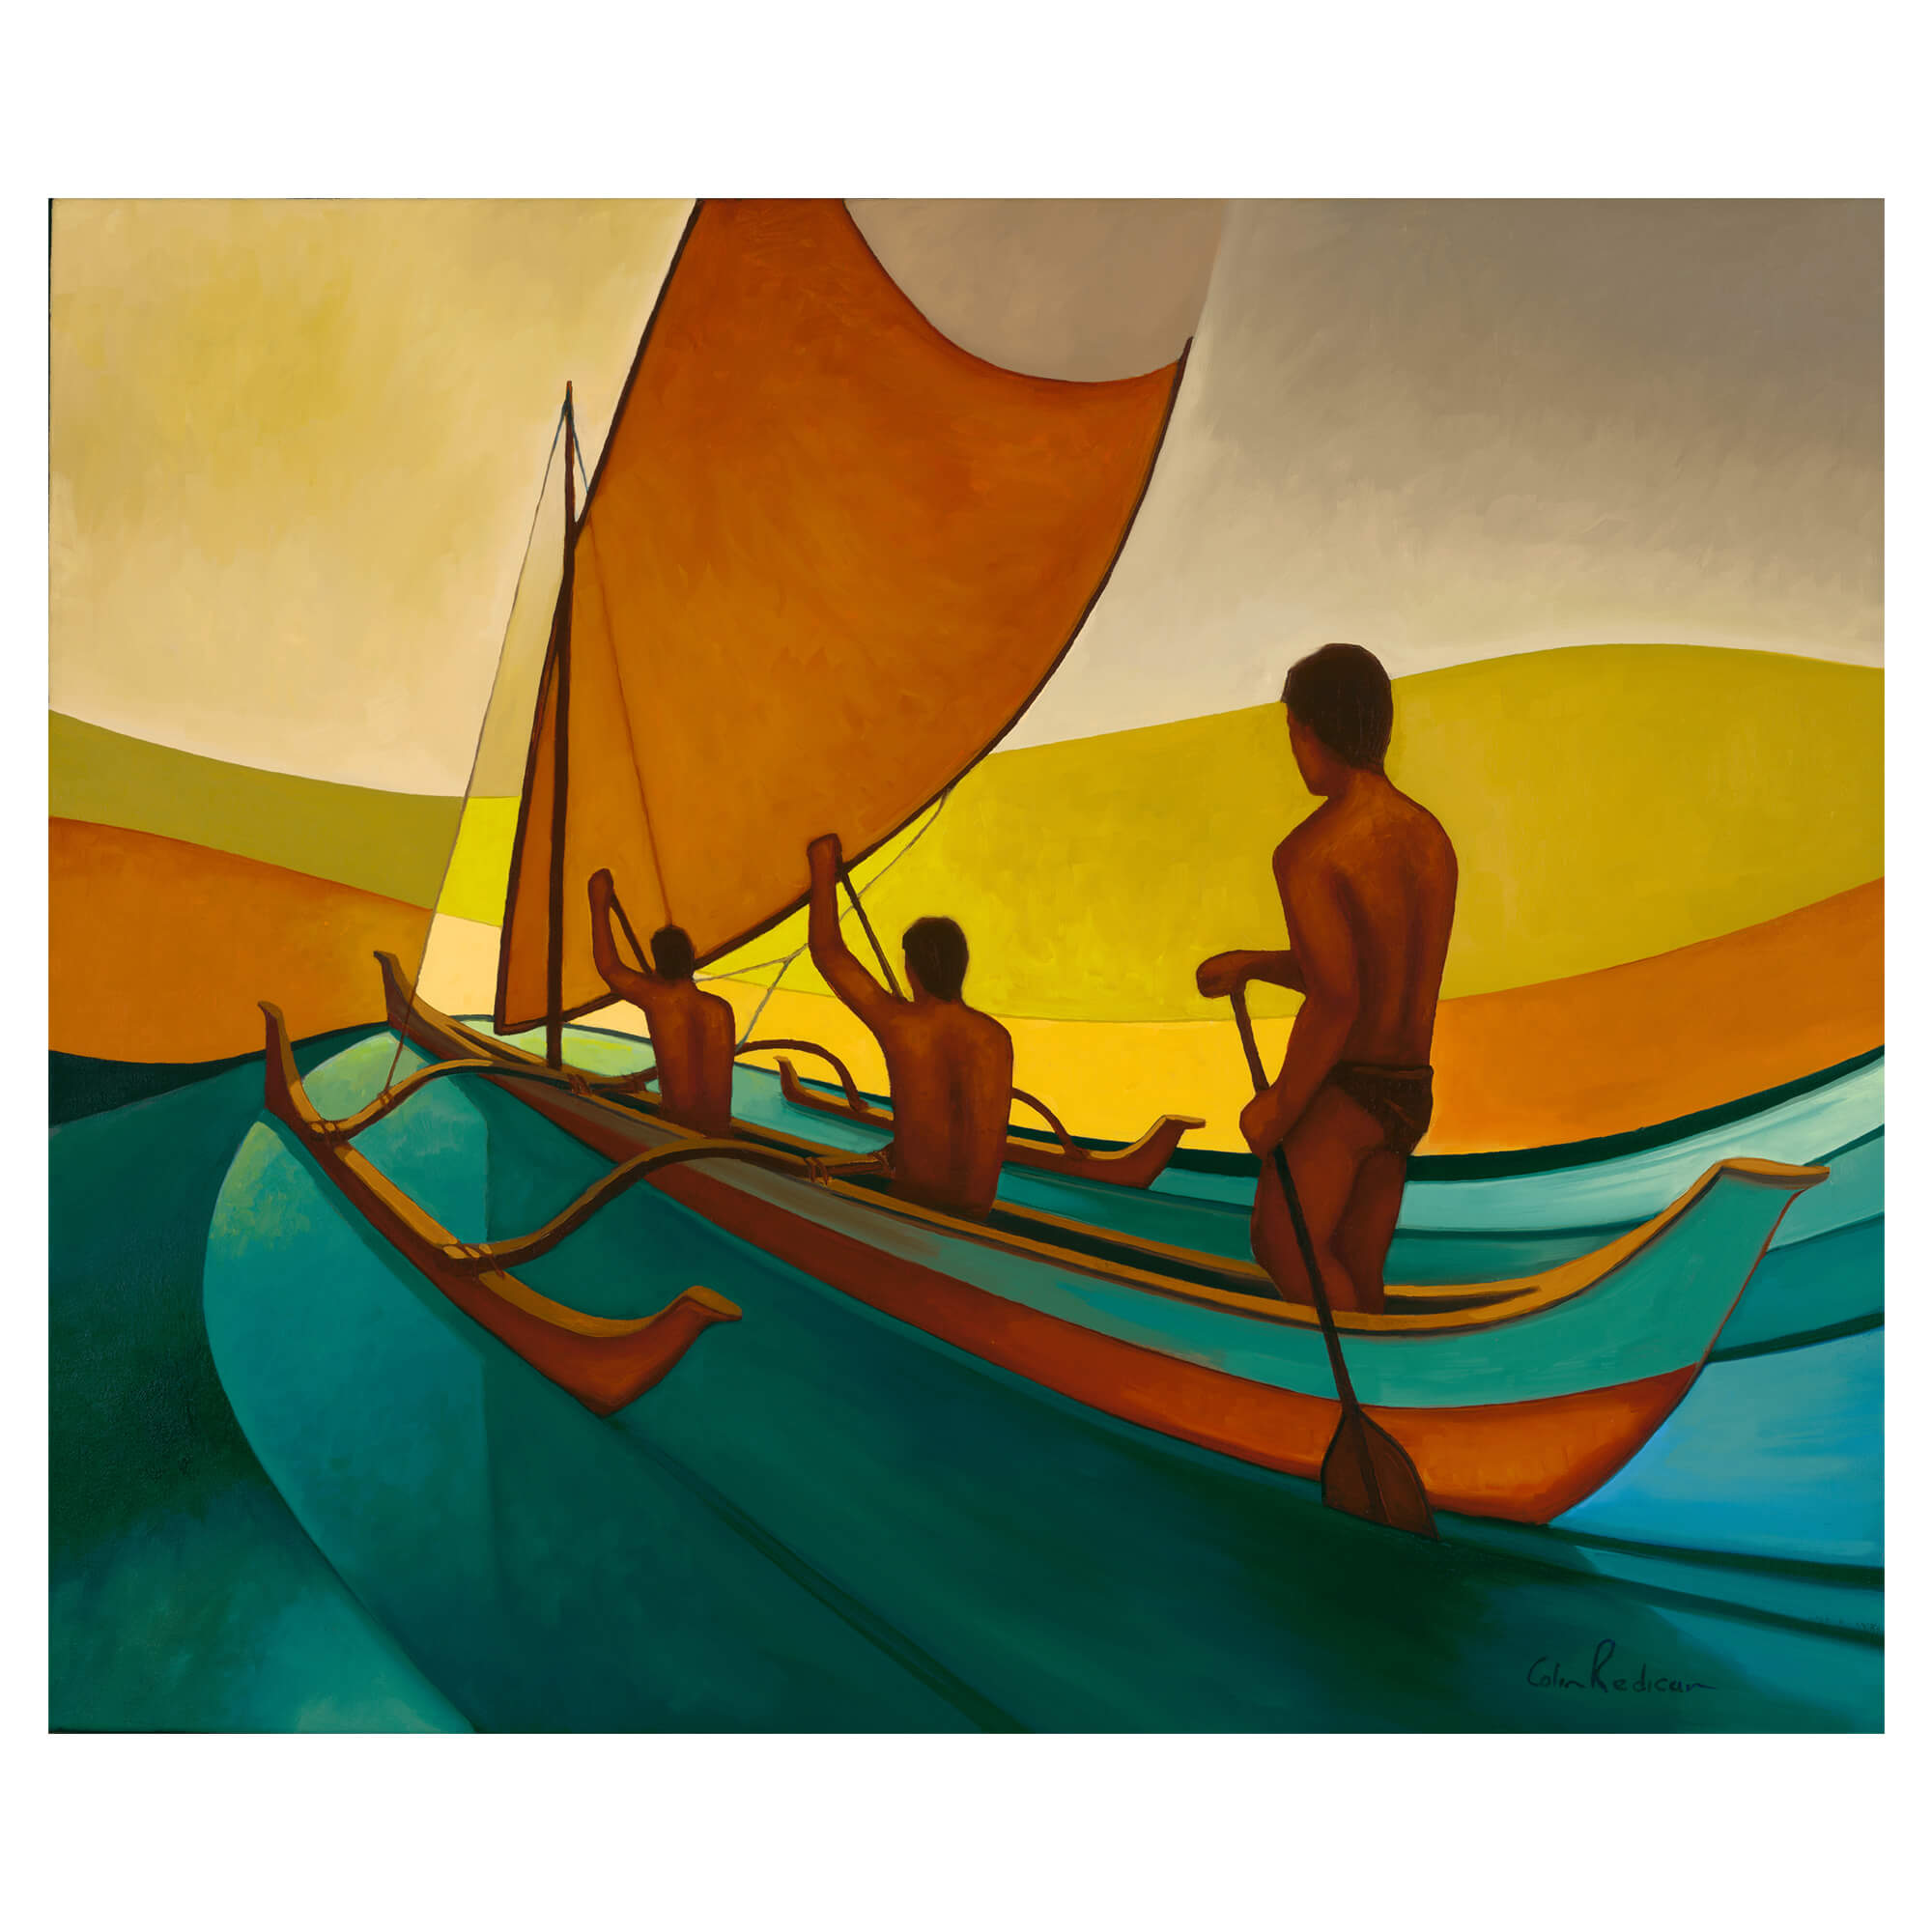 An abstract depiction of men on a voyage by Hawaii artist Colin Redican